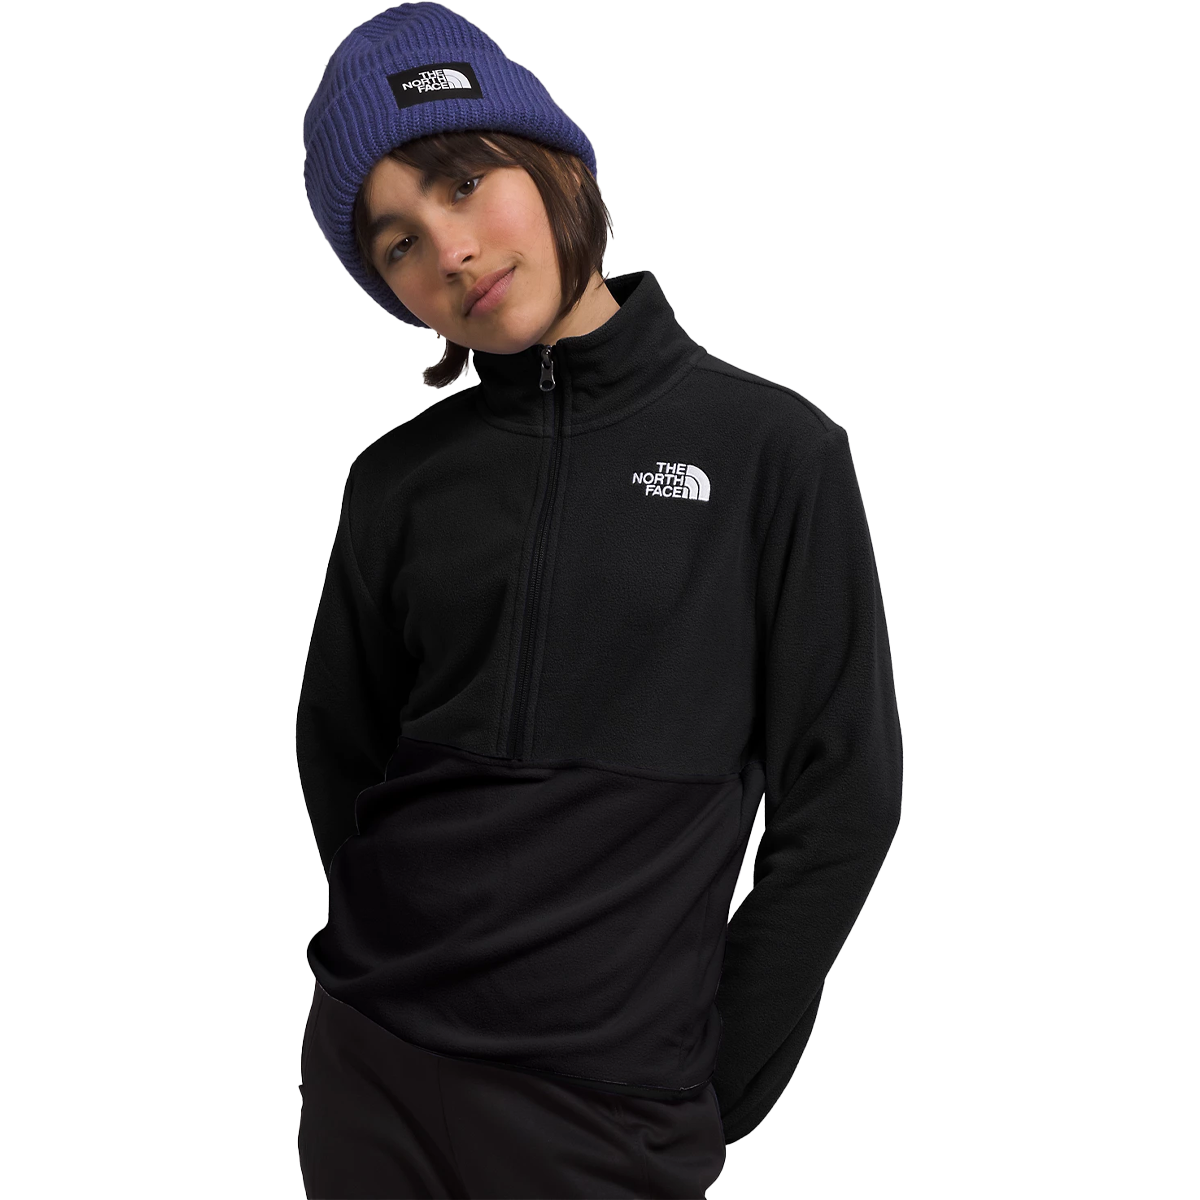 Youth Glacier 1/4 Zip Pullover - Teen alternate view